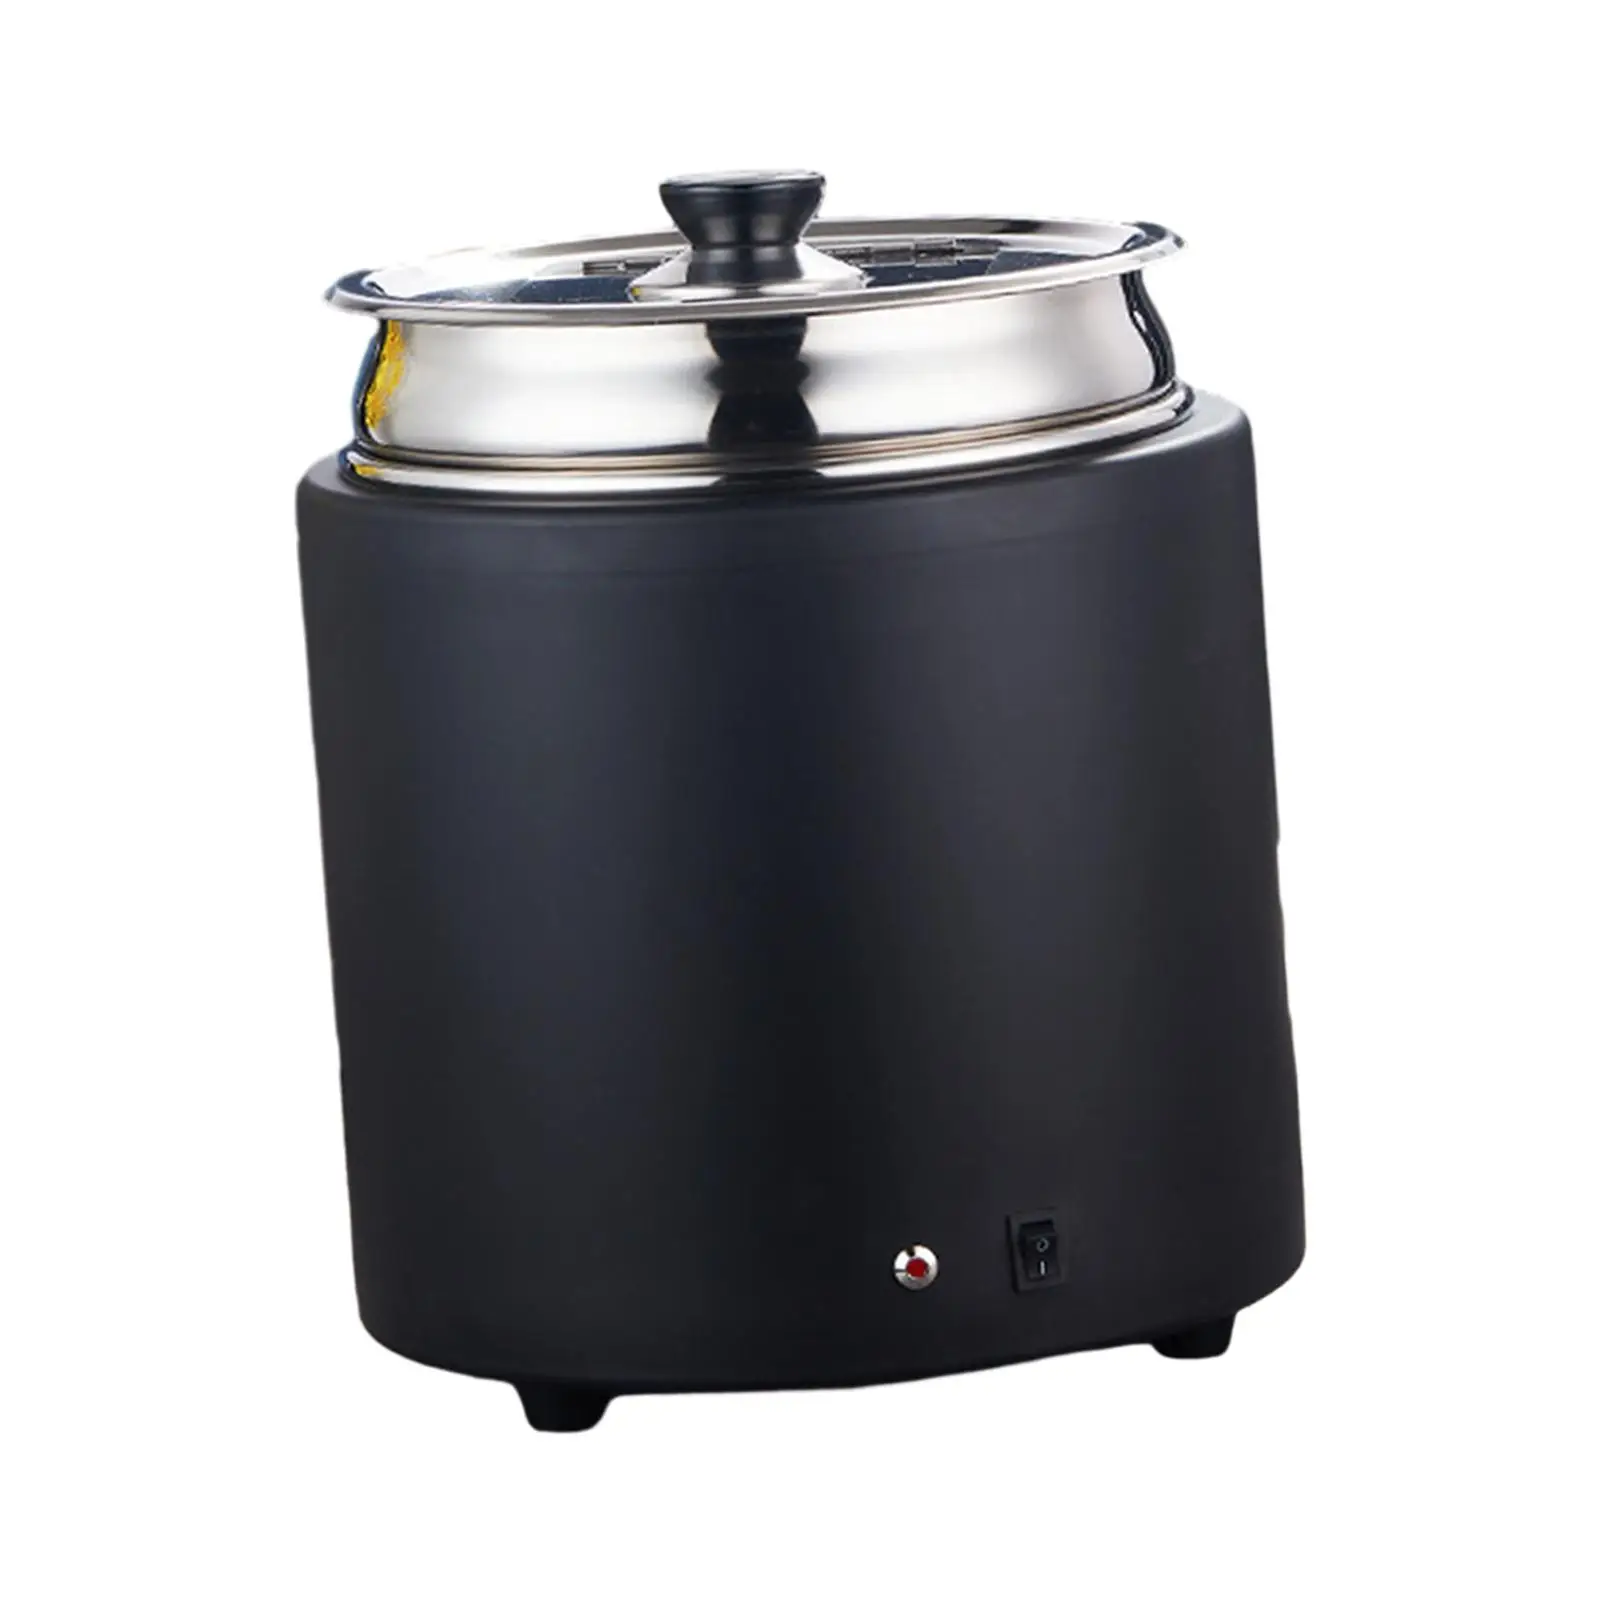 Stainless Steel Electric Soup Pot Multifunctional Kitchen Tool Insulated Warm Soup Pot for Stews Porridges Making Soups Hotel